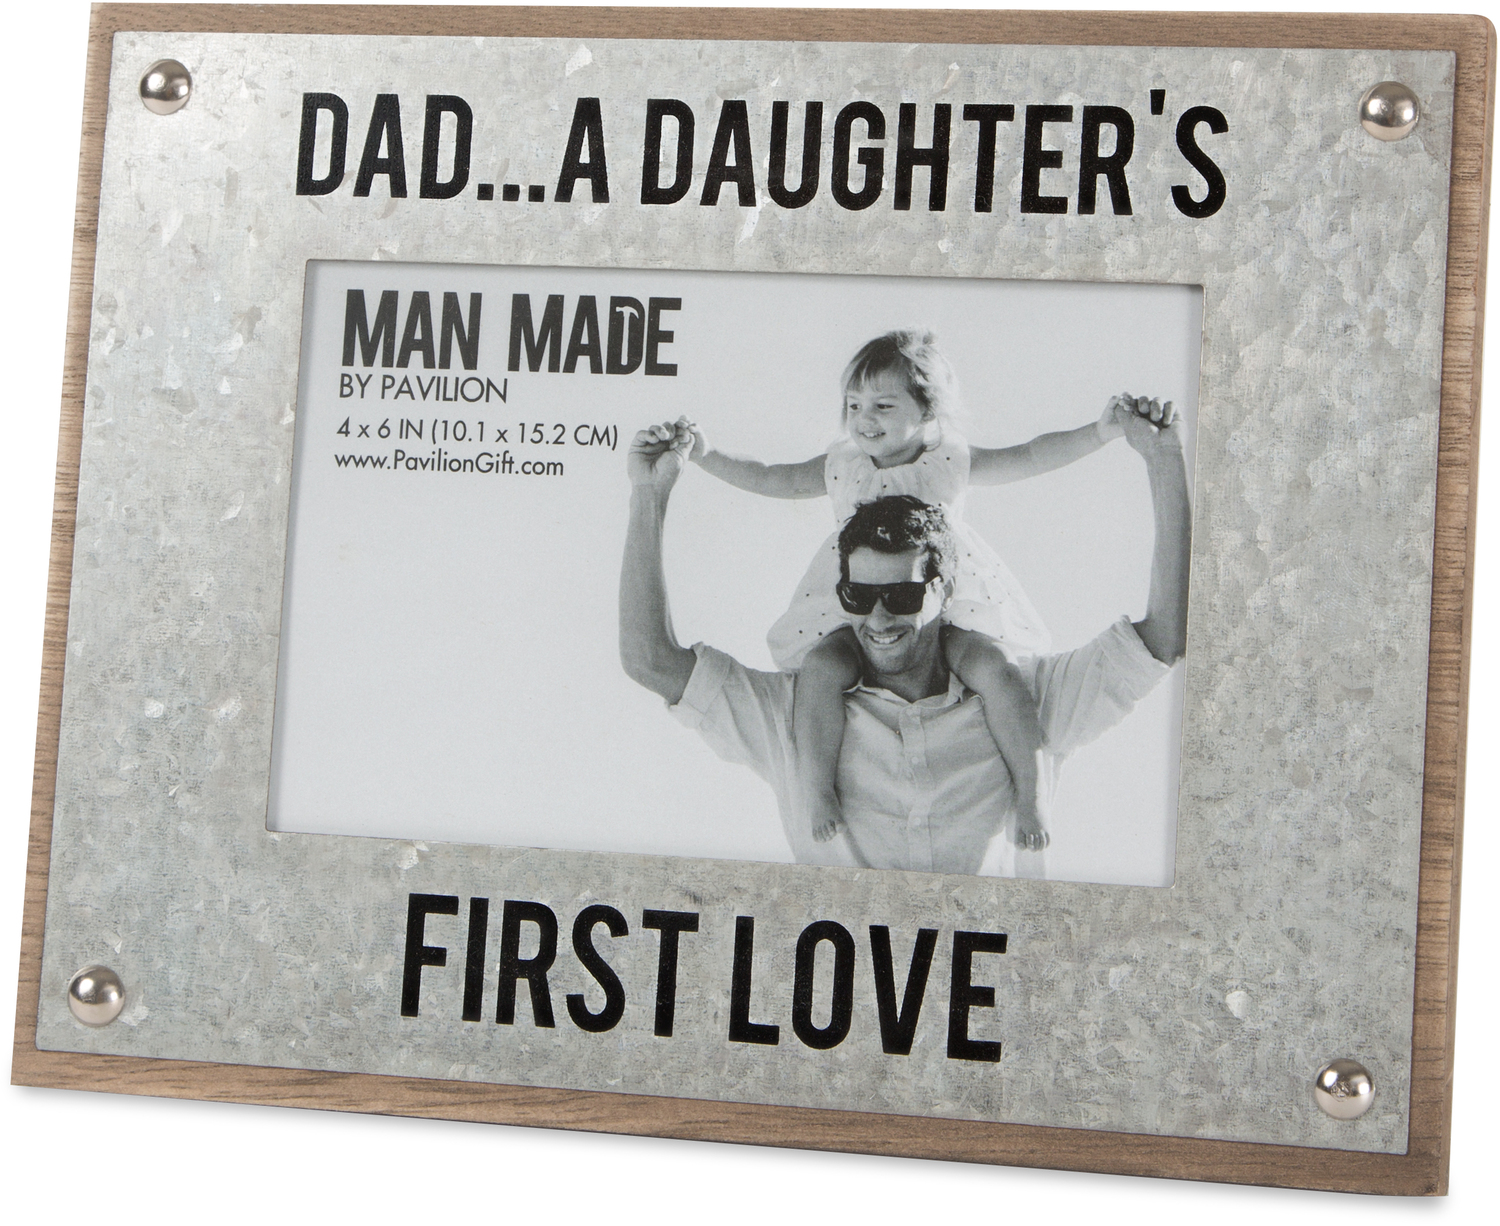 First Love by Man Made - First Love - 8.5" x 6.5" Frame
(Holds 4" x 6" Photo)